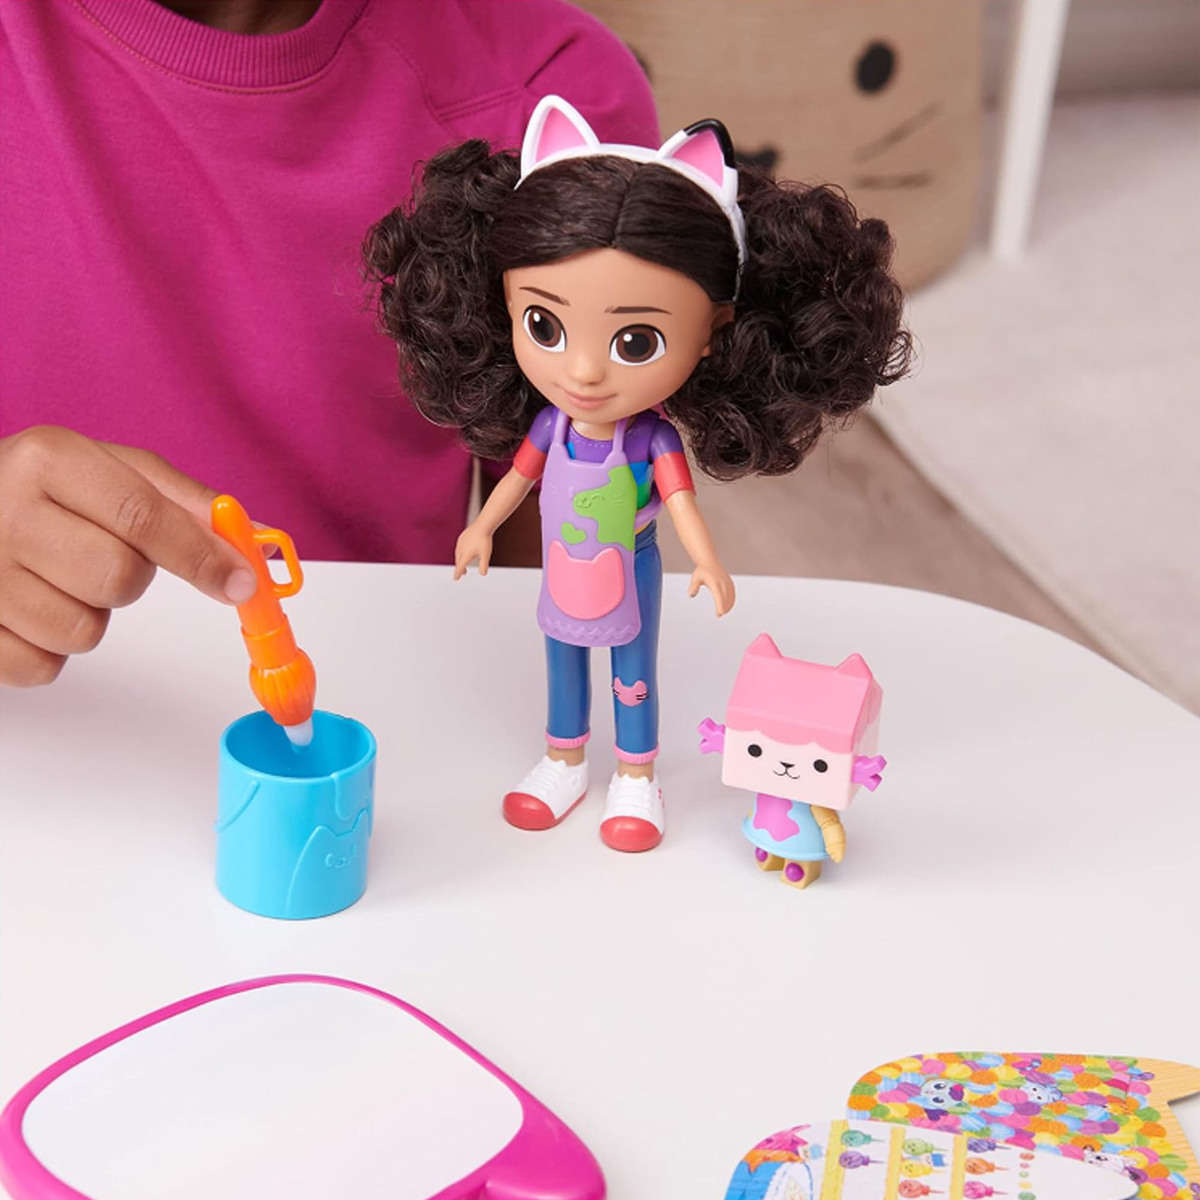 Gabby’s Dollhouse Gabby Deluxe Craft Dolls and Accessories with Water Pad and Water Brush Pen, 6064228